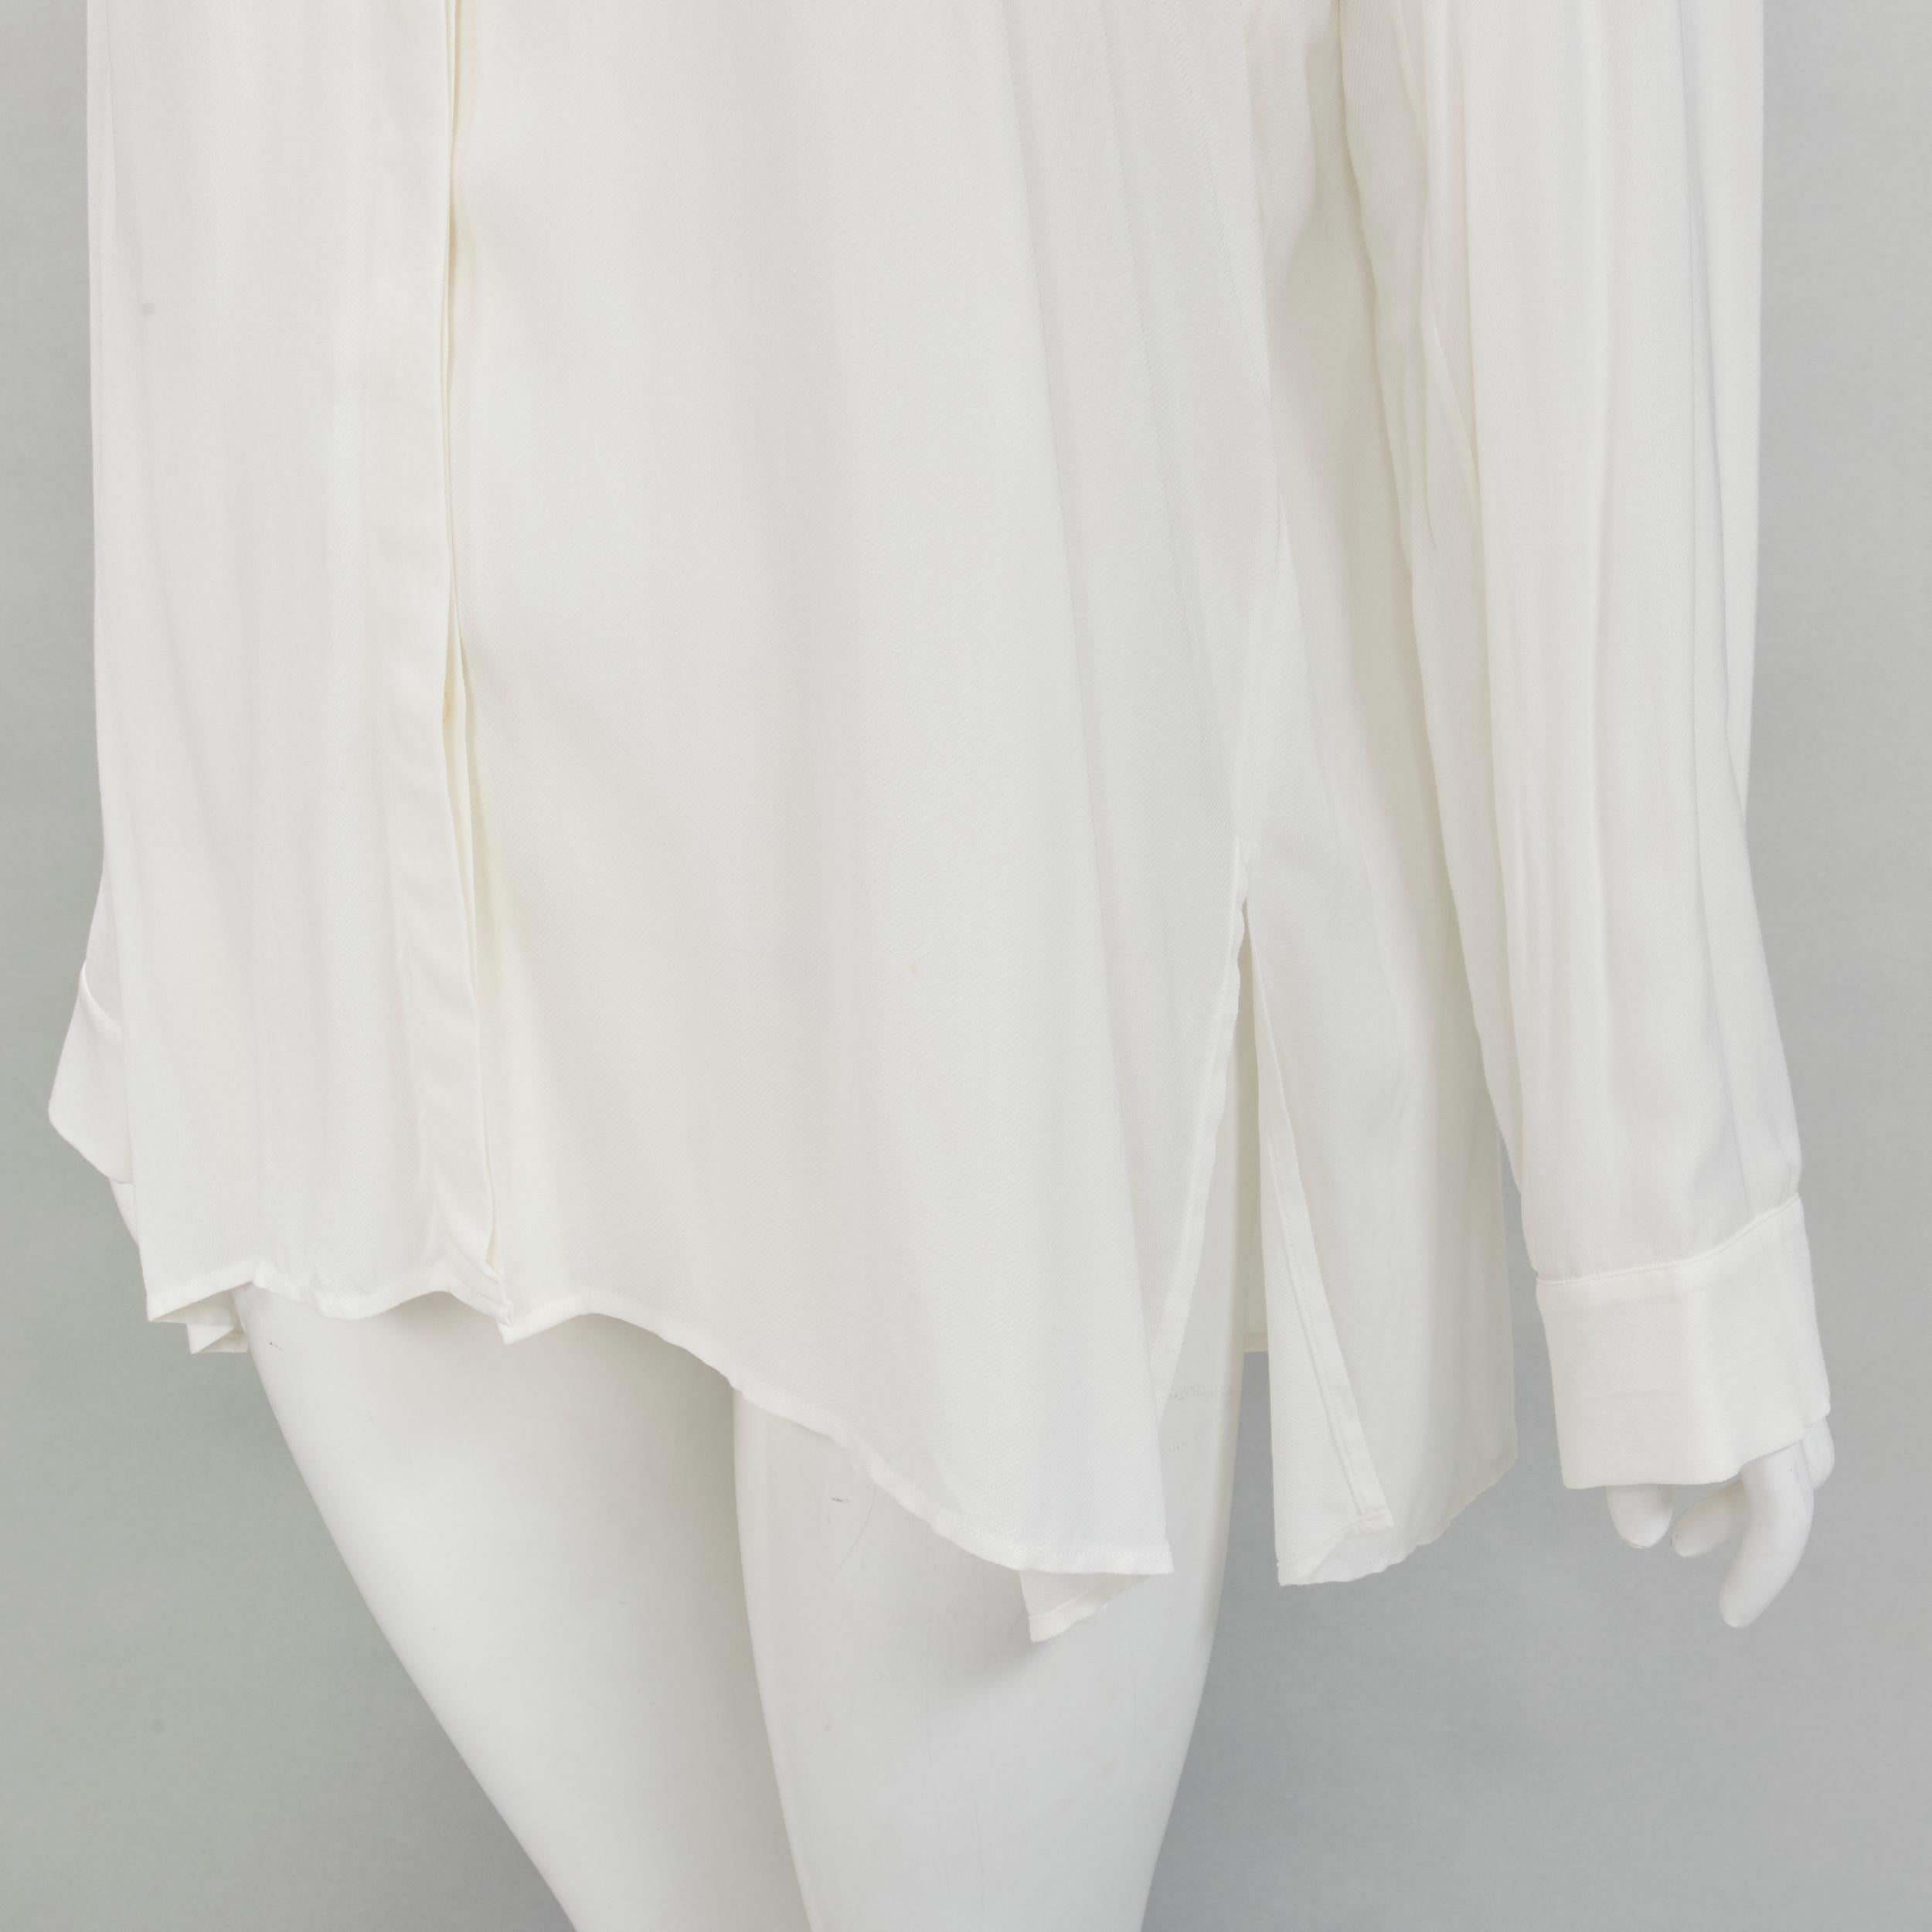 THE ROW 100% viscose white relaxed fit pleated back minimalist shirt S
Brand: The Row
Designer: Mary Kate and Ashley Olsen
Material: Viscose
Color: White
Pattern: Solid
Closure: Button
Extra Detail: Concealed button front. Side slit. Pleated